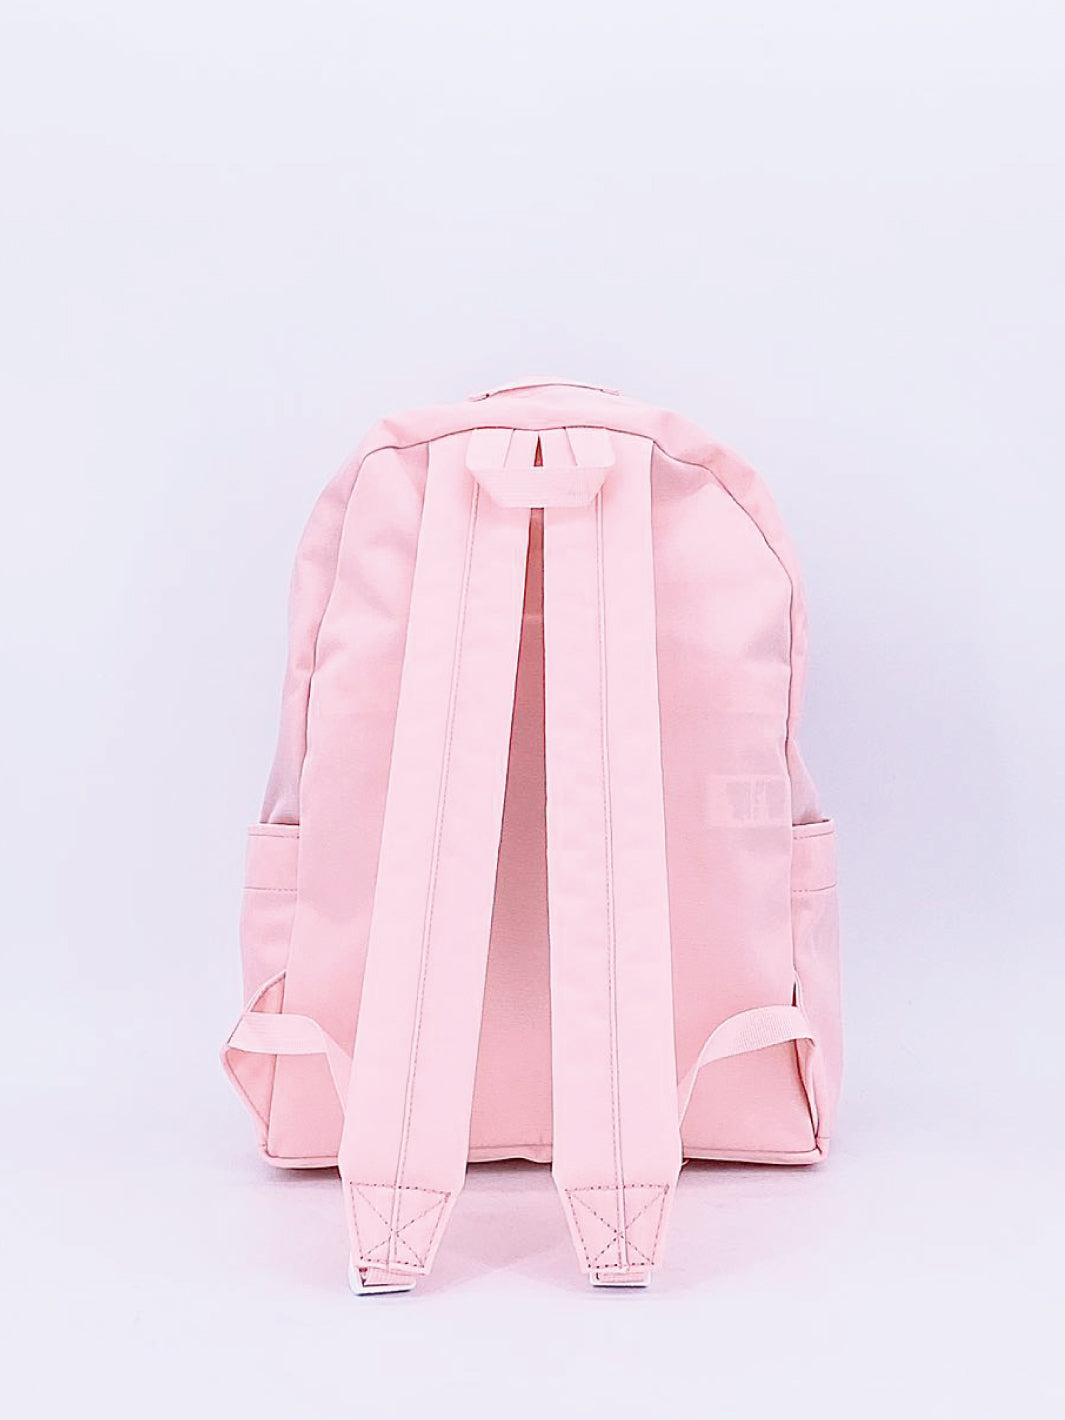 BACKPACK (MIDDLE)